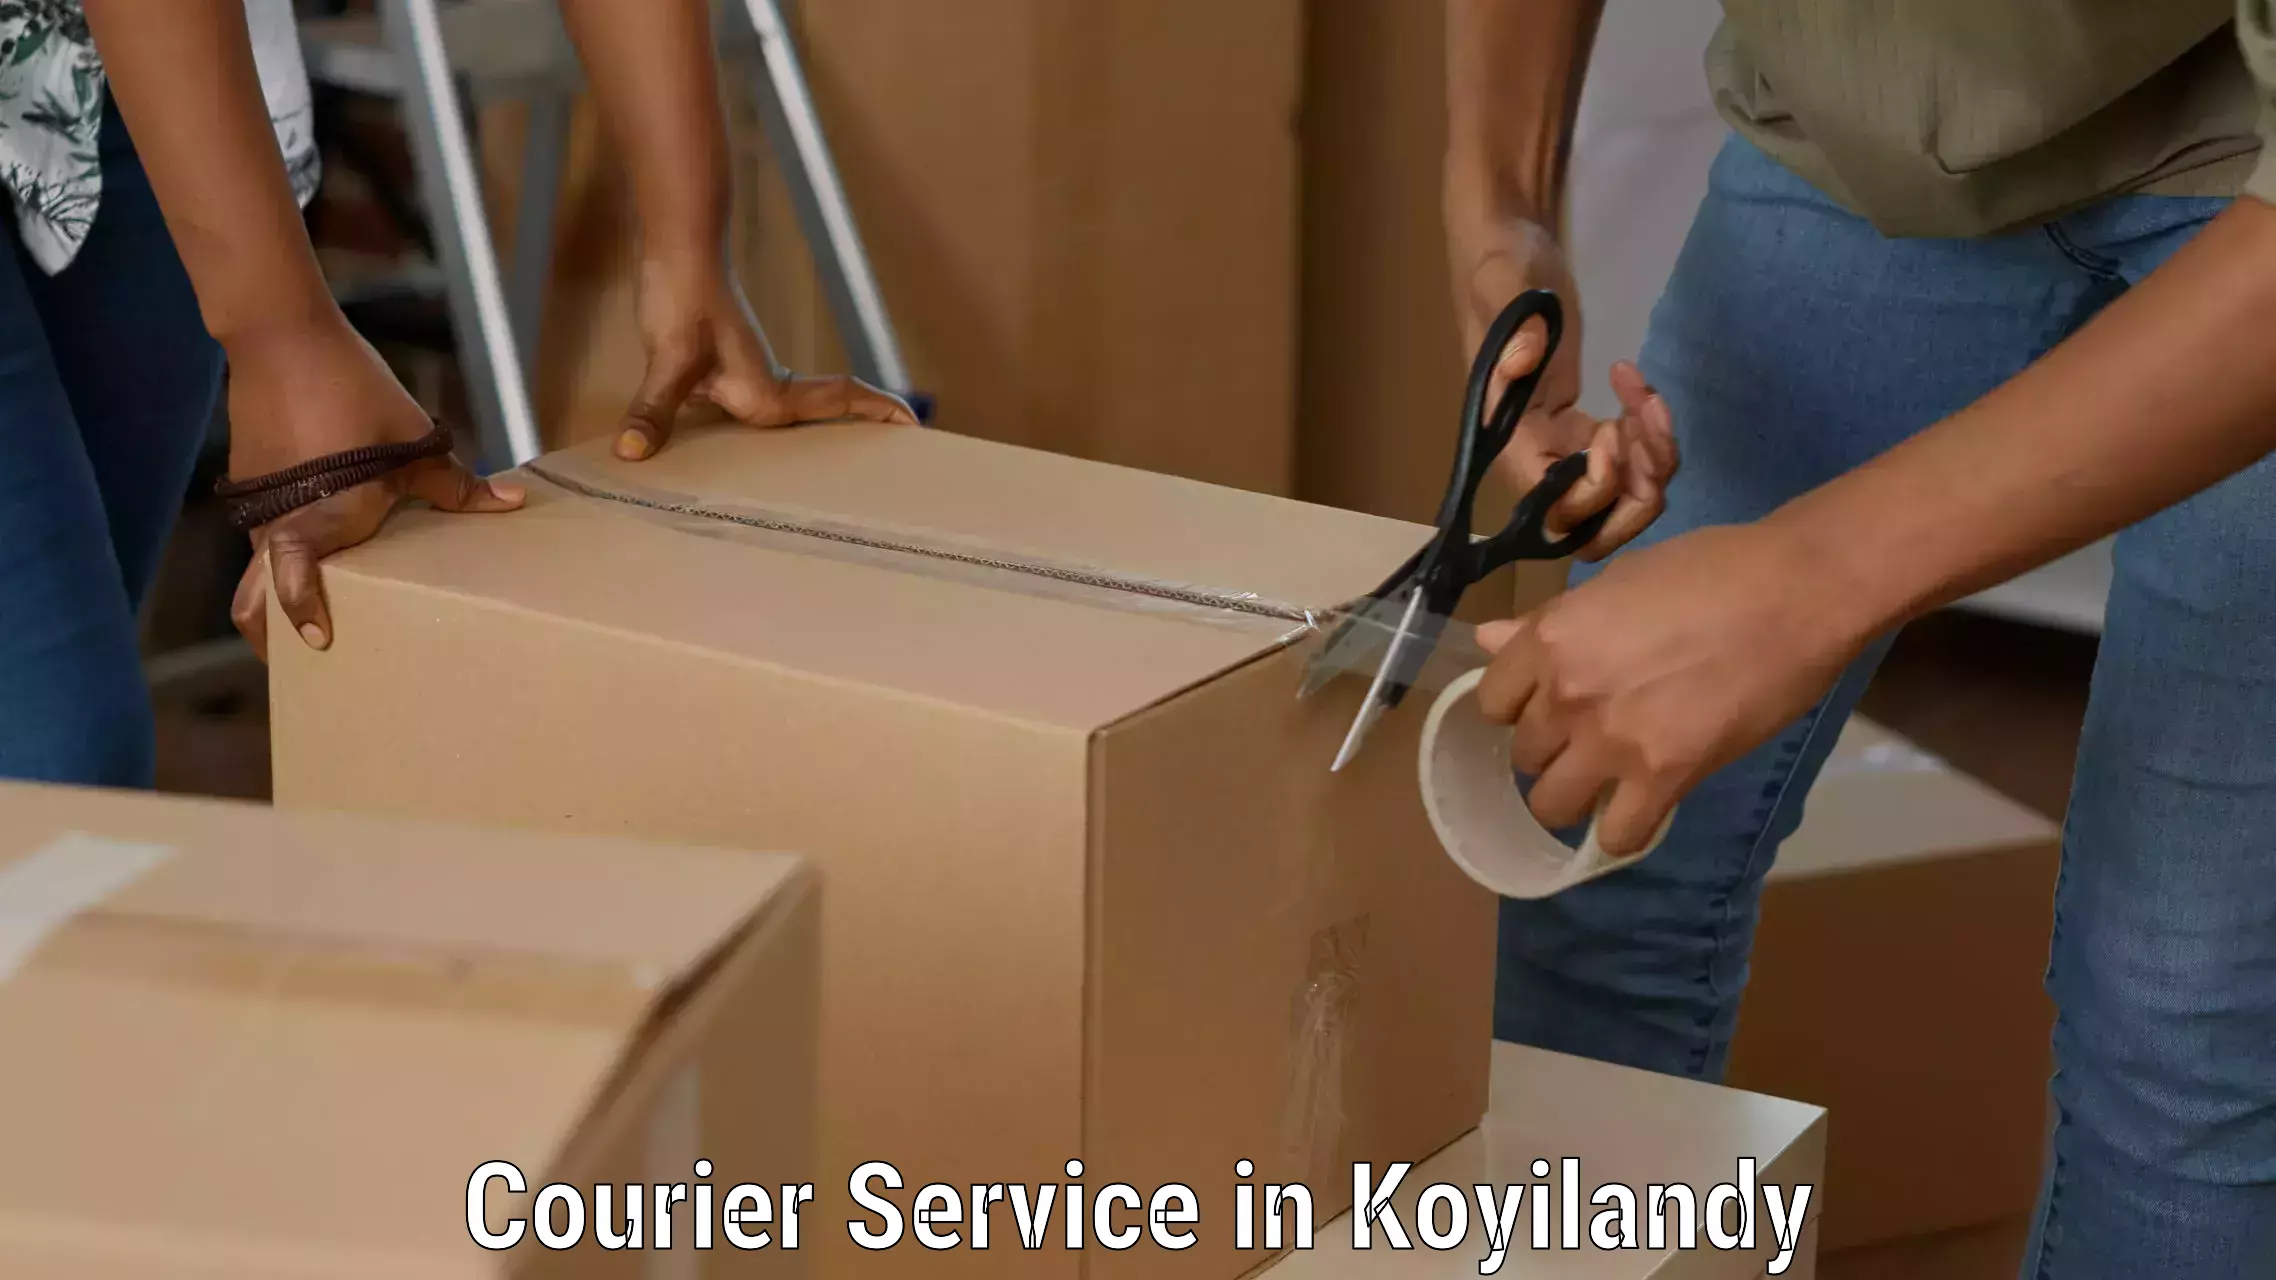 Advanced freight services in Koyilandy